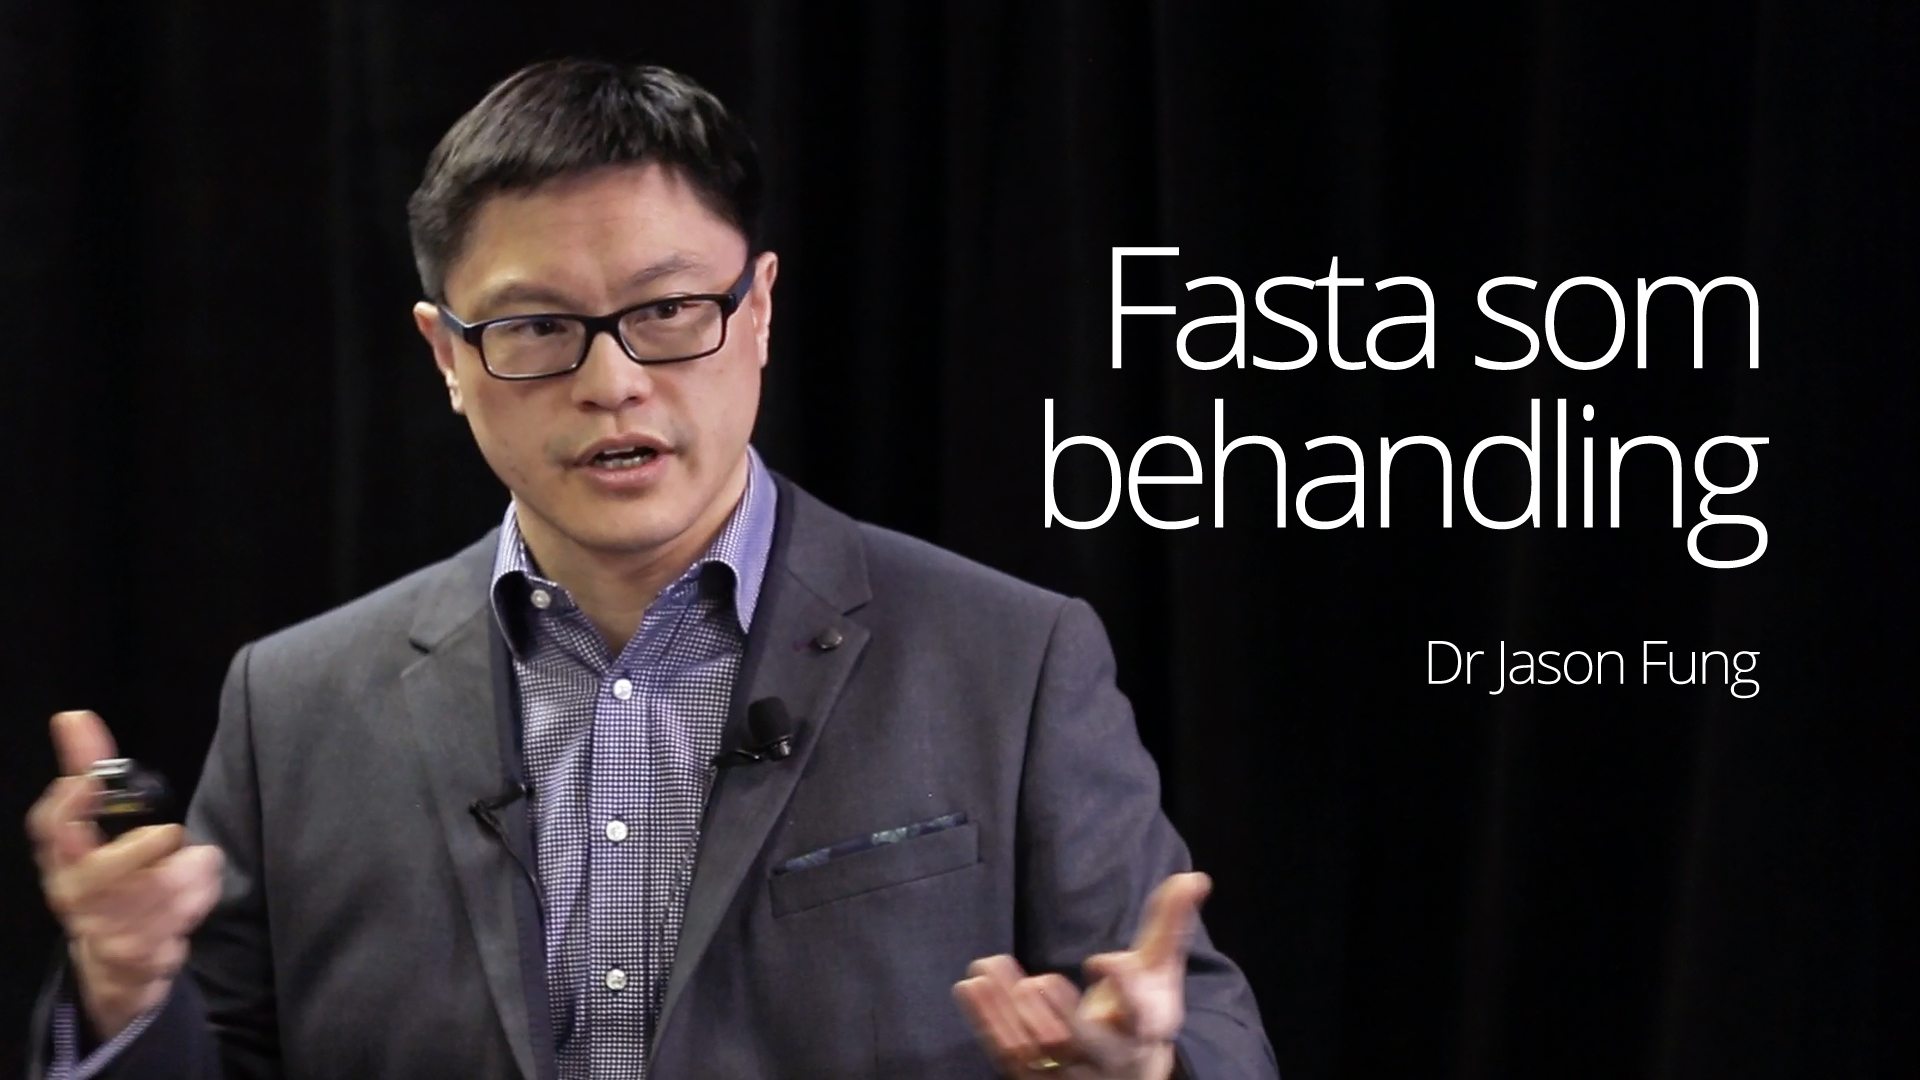 Dr. Jason Fung - Therapeutic Fasting